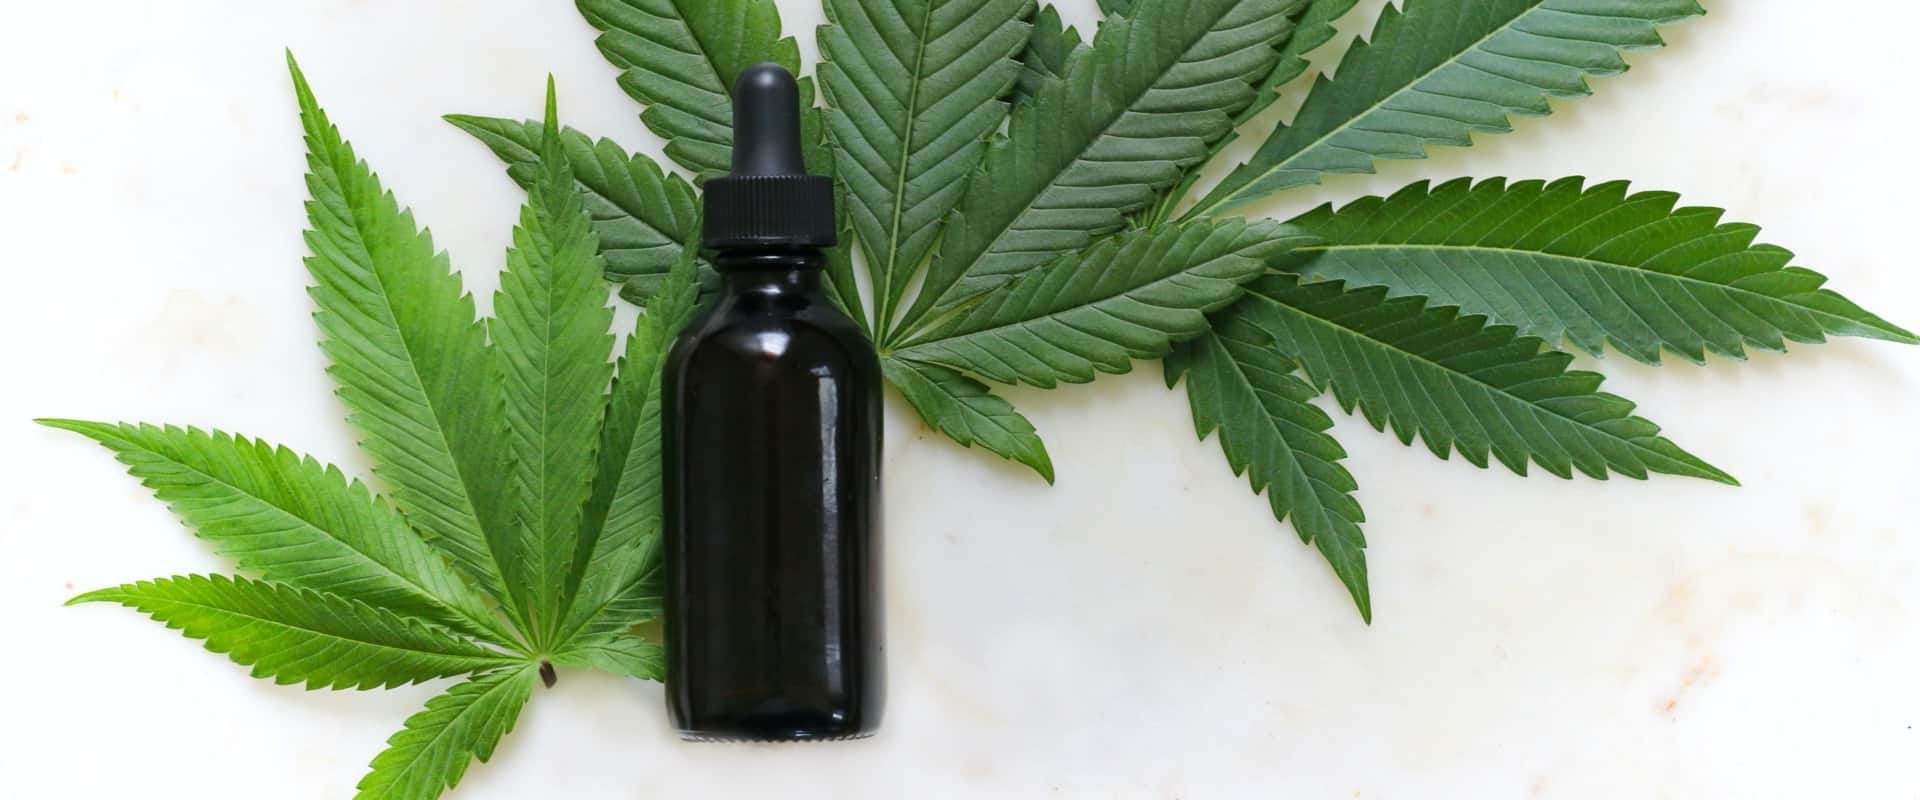 Is CBD Oil Legal in Other Countries?